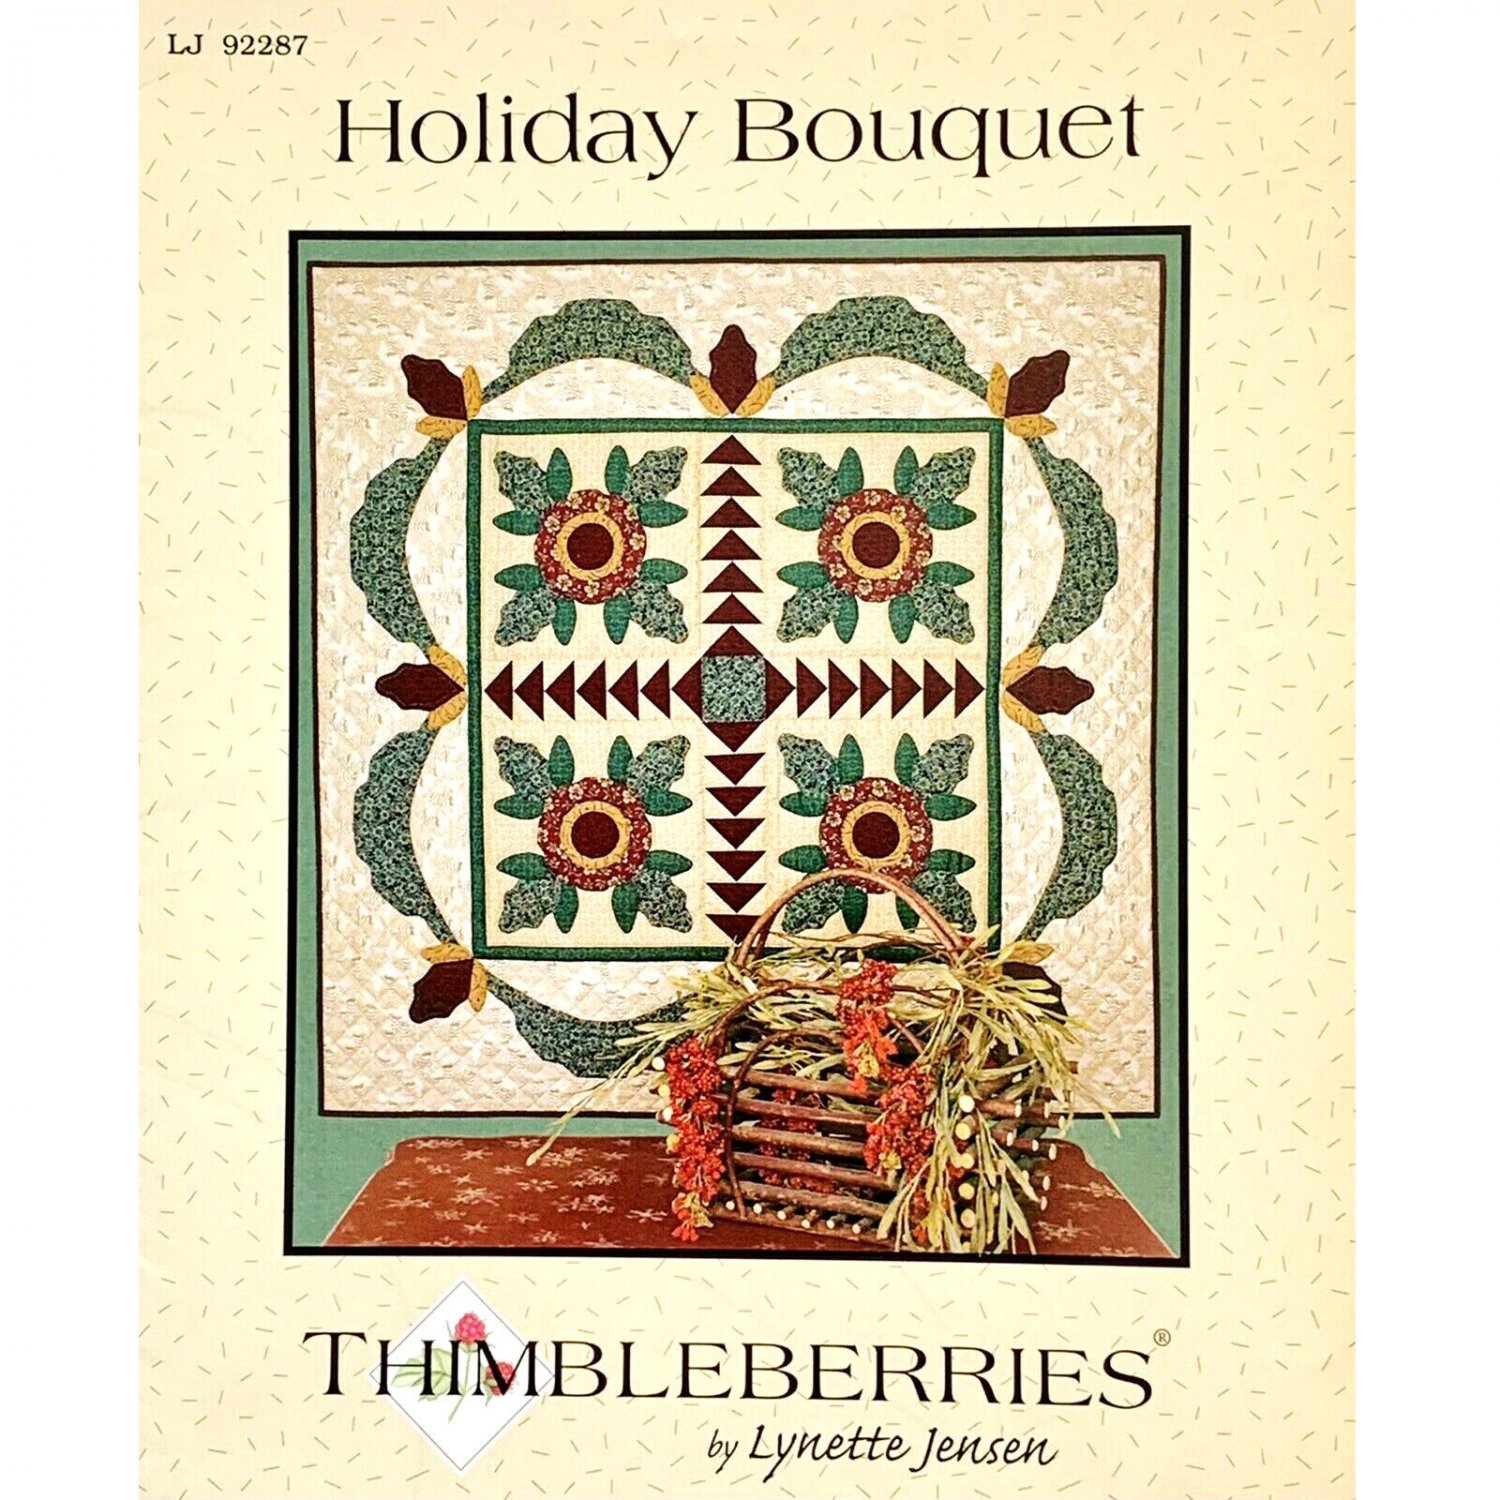 Thimbleberries Holiday Bouquet Christmas Quilt Pattern LJ92287 by Lynette Jensen